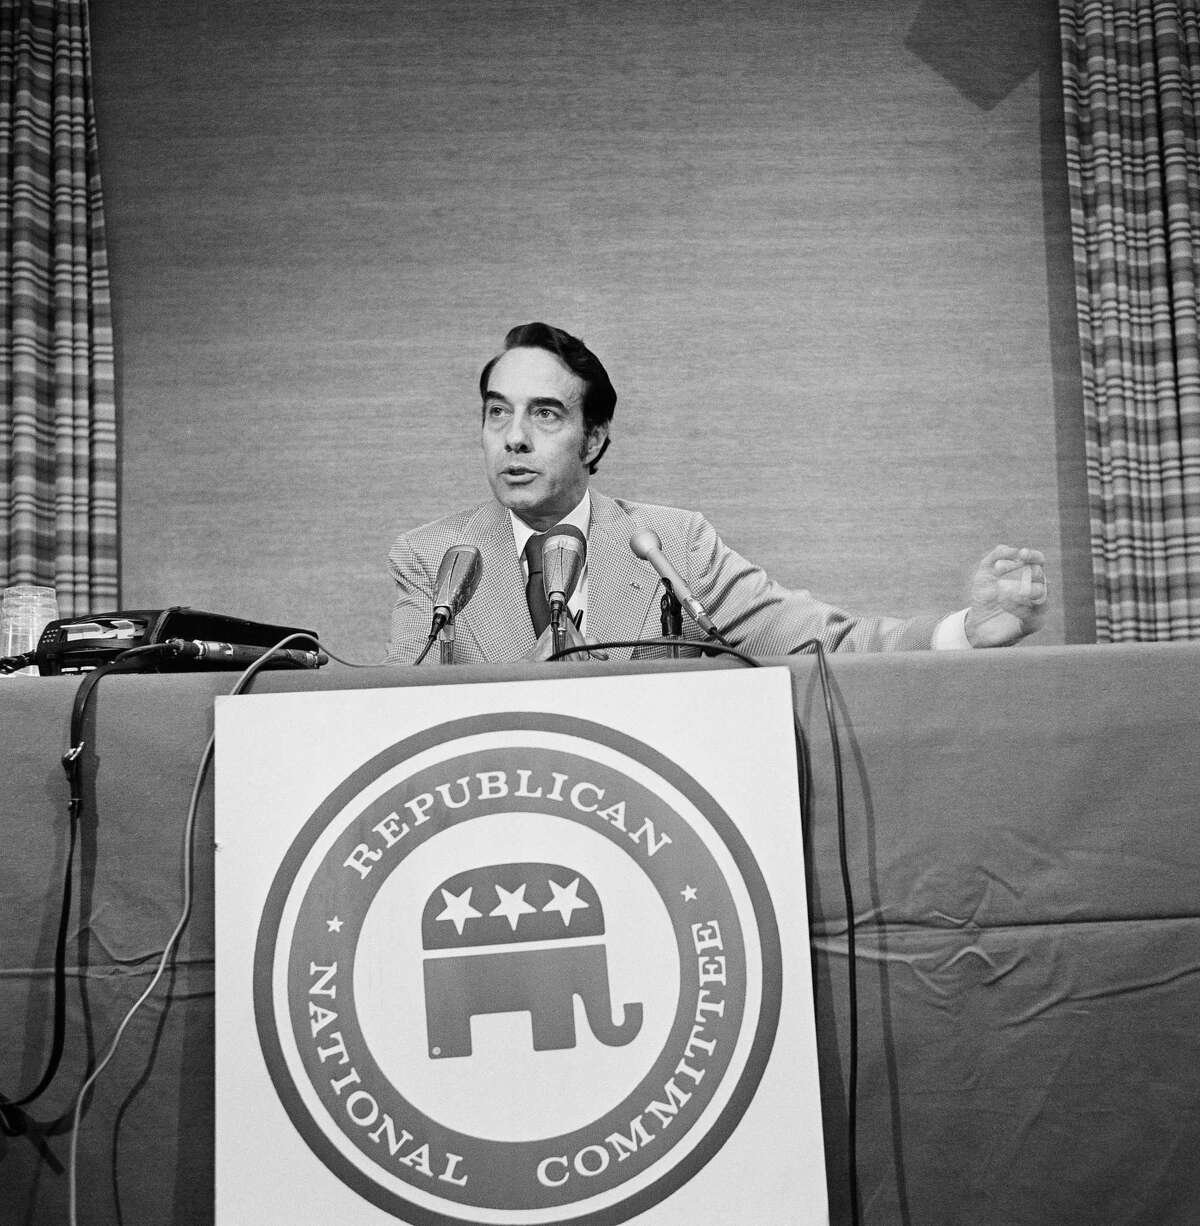 FILE - In this April 22, 1972, file photo Sen. Robert Dole (R-Kan), chairman of the Republican National Committee, speaks in Chicago. Bob Dole, who overcame disabling war wounds to become a sharp-tongued Senate leader from Kansas, a Republican presidential candidate and then a symbol and celebrant of his dwindling generation of World War II veterans, has died. He was 98. His wife, Elizabeth Dole, posted the announcement Sunday, Dec. 5, 2021, on Twitter. (AP Photo/ESK, File)